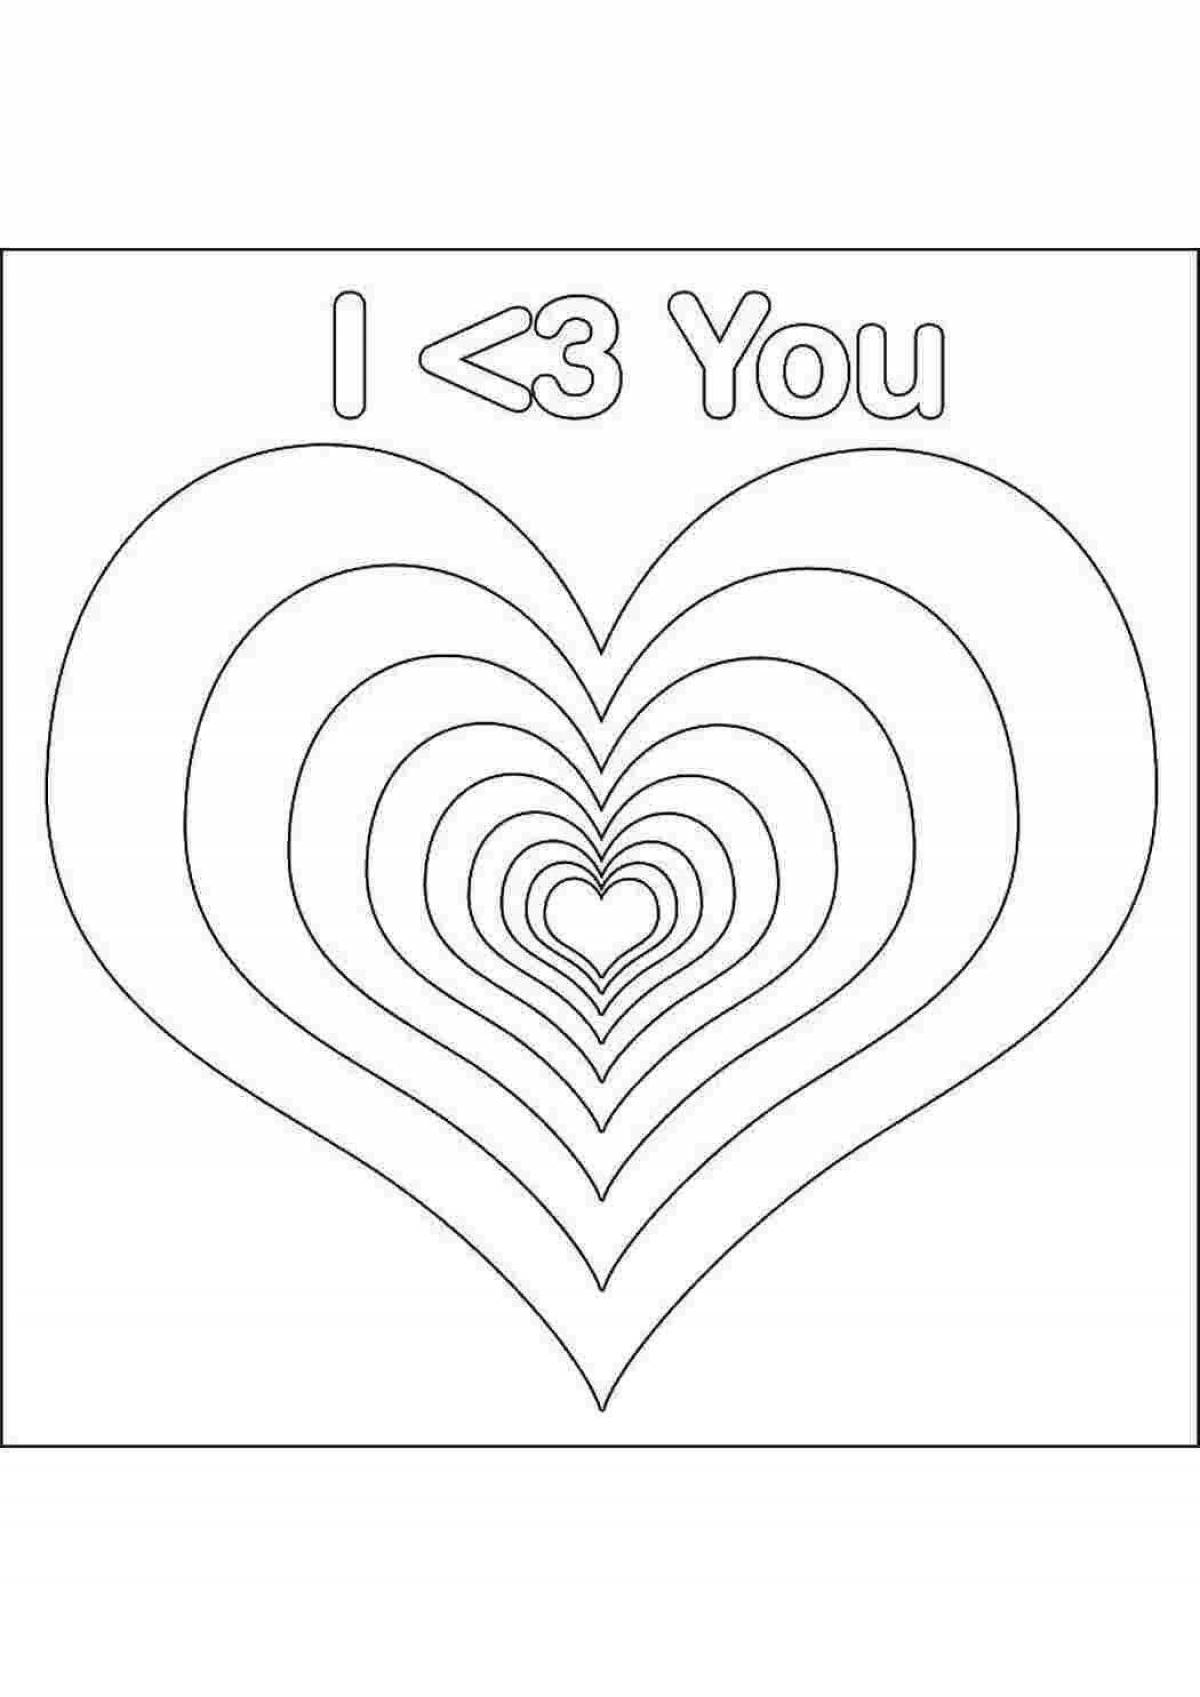 Fun coloring pages with hearts